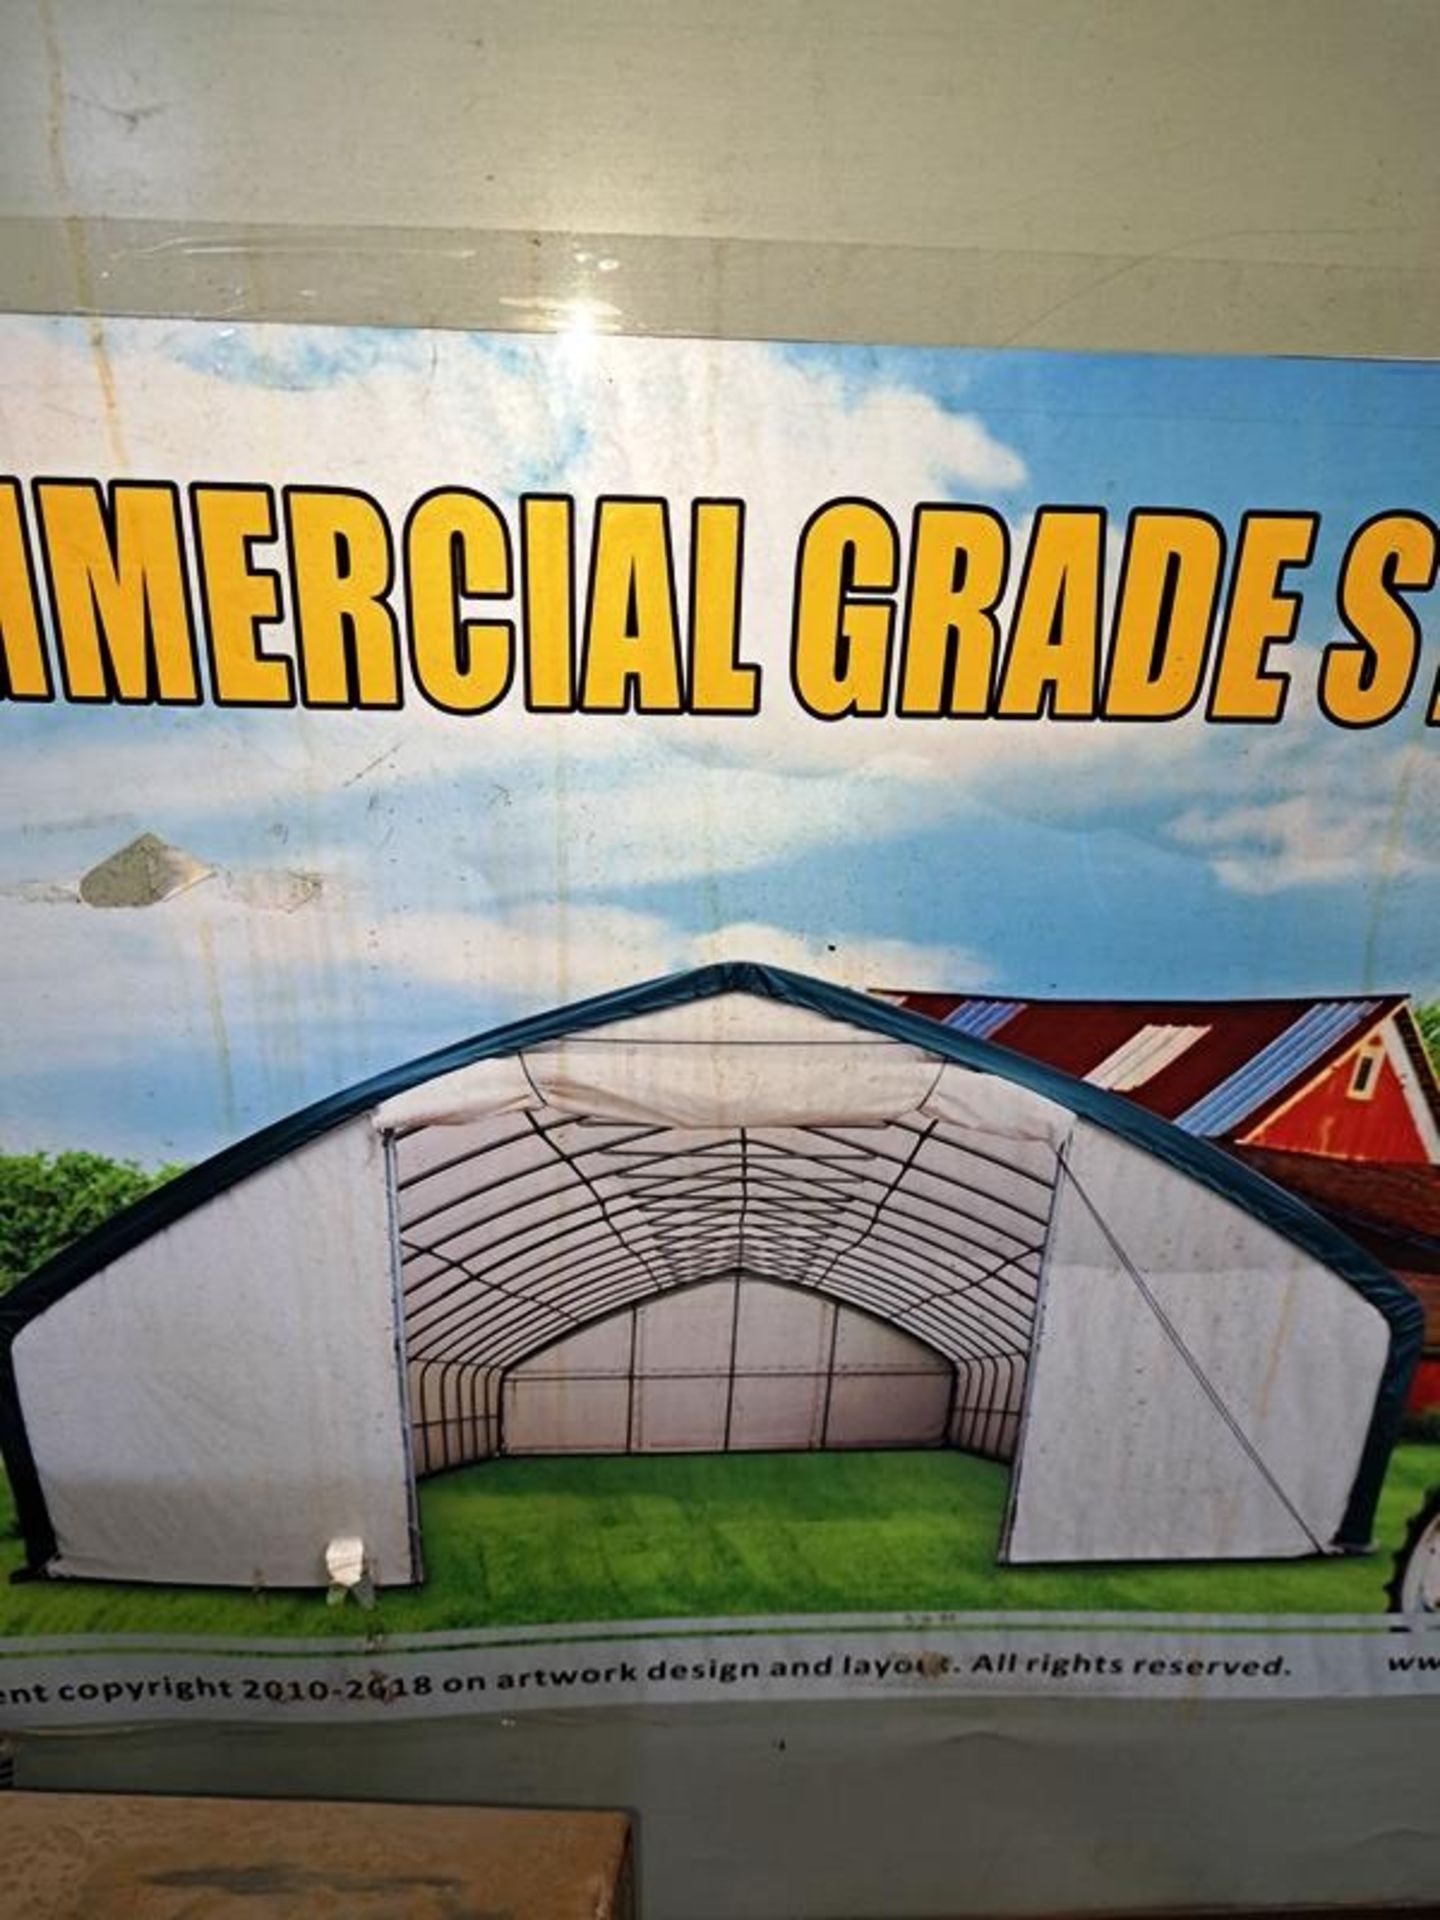 TMG Industrial Mdl. 3050SW-11P Commercial Grade Storage Shelter, 30" wide X 50' long, Ridge ht 16 - Image 4 of 4